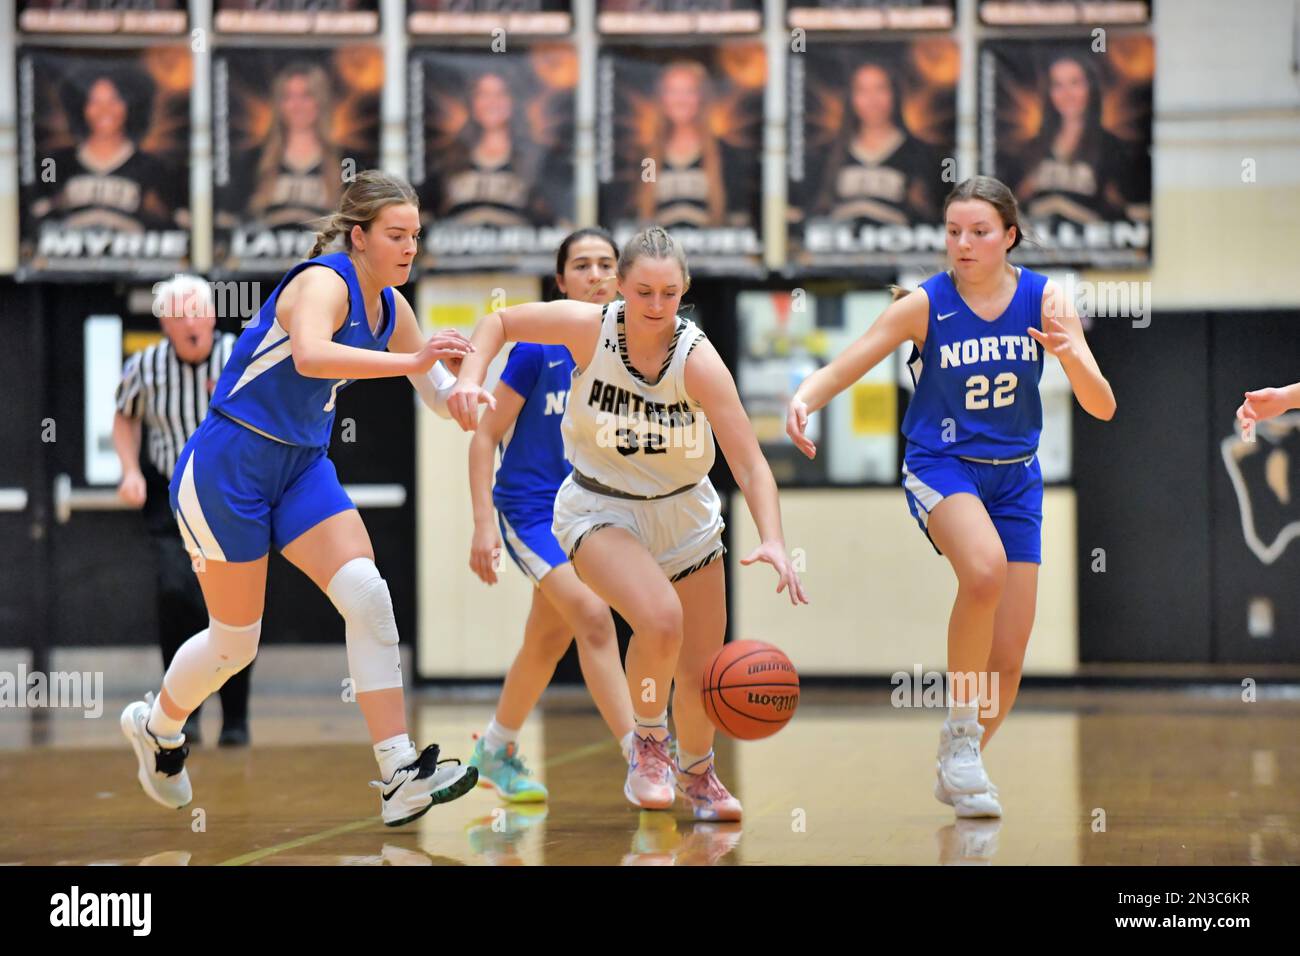 USA. Player driving on the basket with a trio of defenders in pursuit during a high school varsity basketball game. Stock Photo